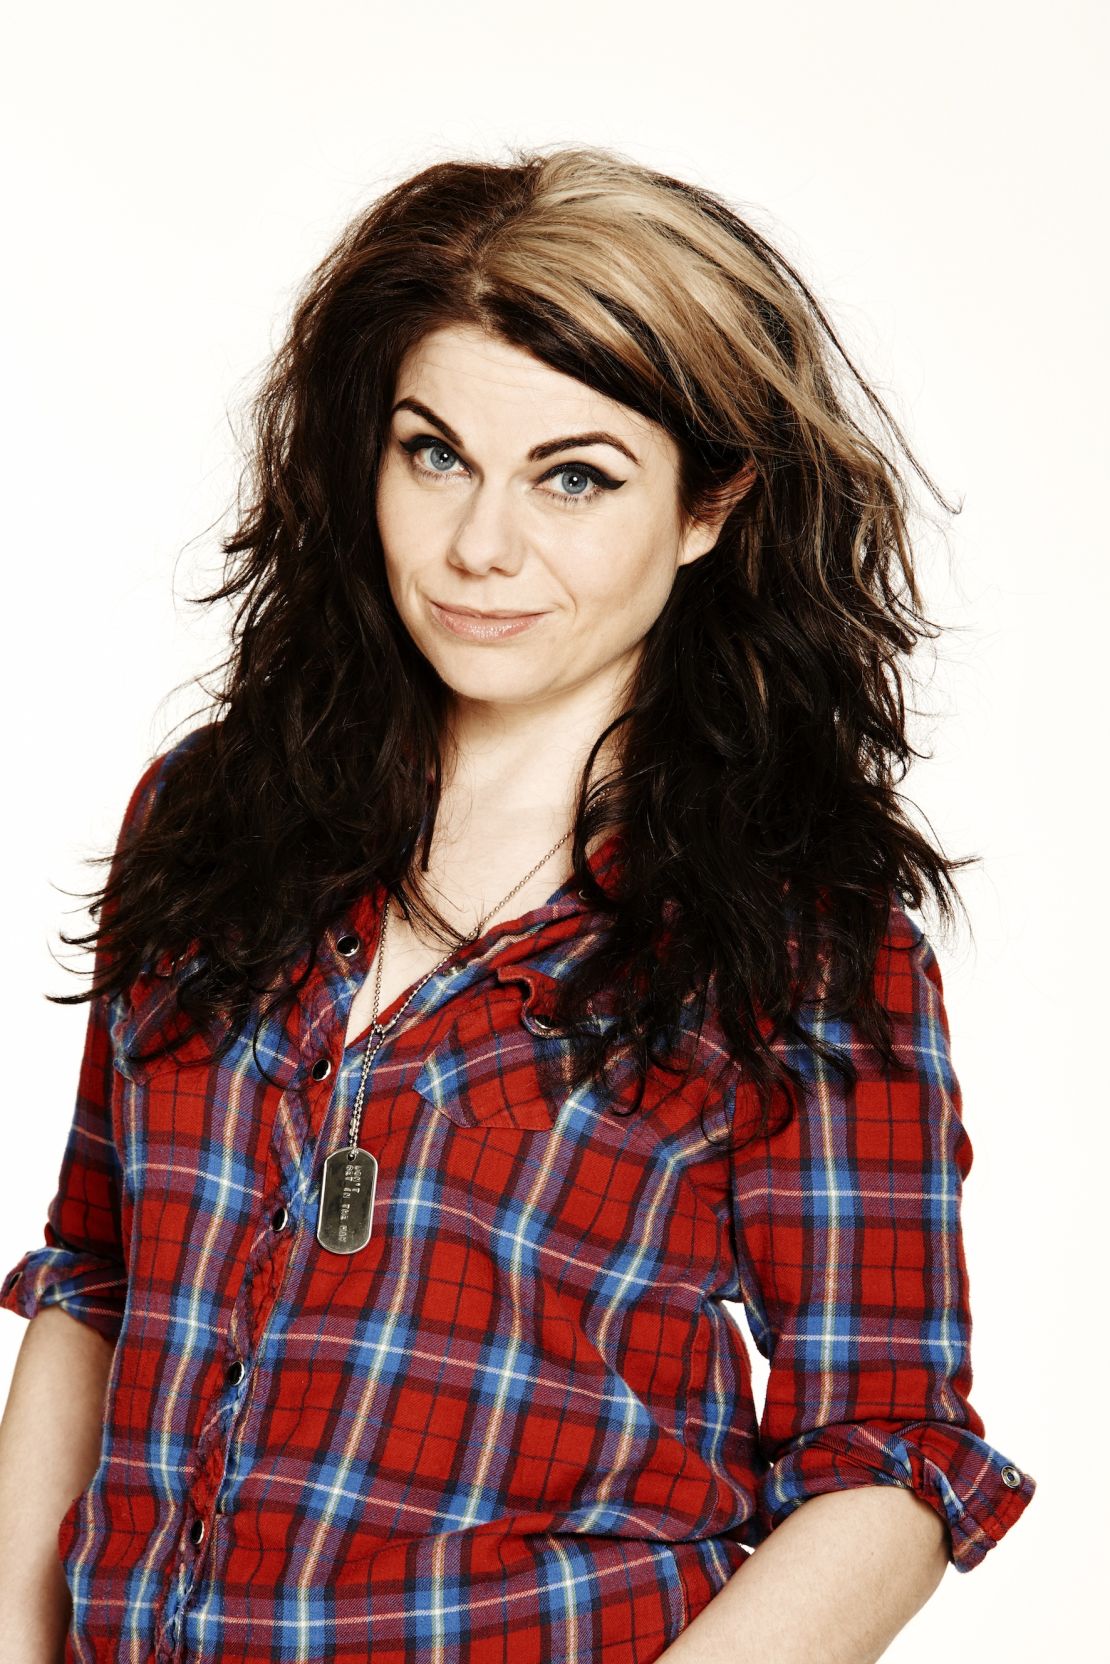 Writer and journalist Caitlin Moran who will be appearing at this year's WOW Festival. 